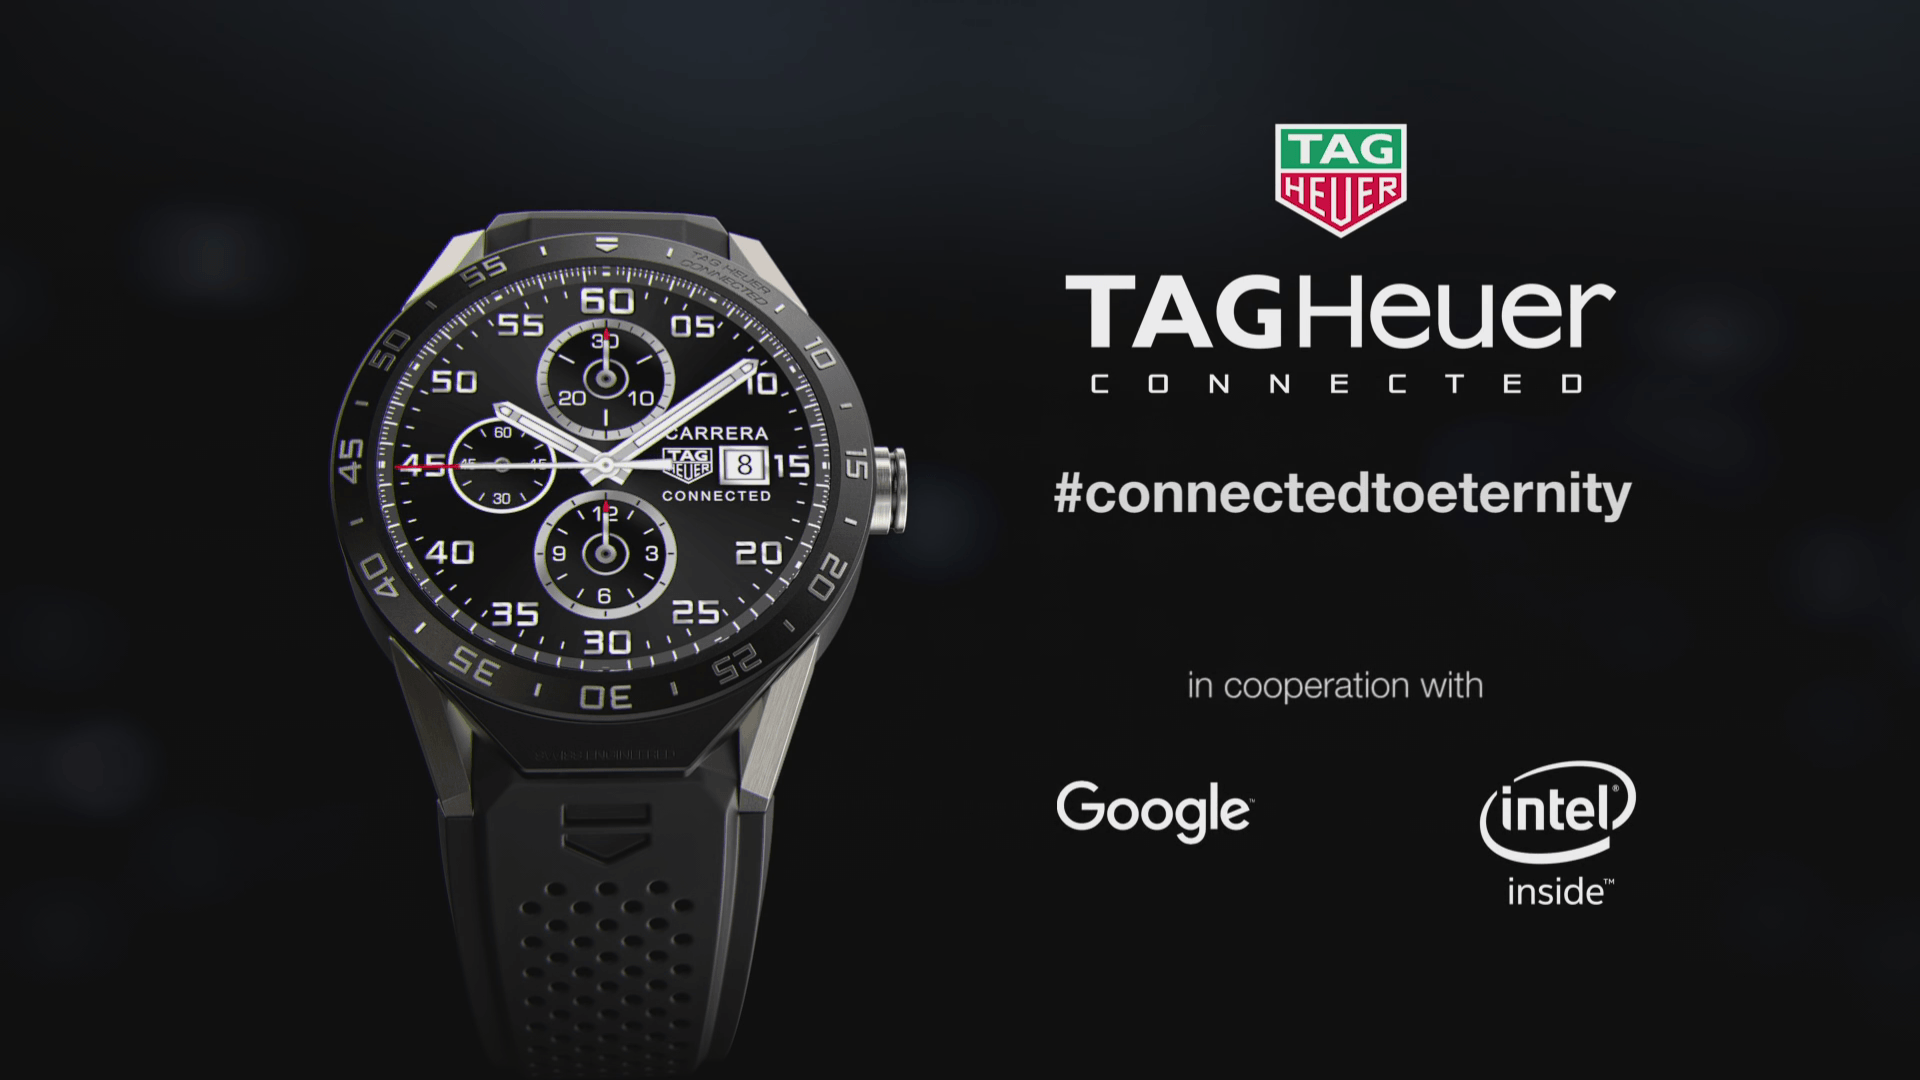 HD Wallpaper. Tag heuer, Skeleton watches, Watches